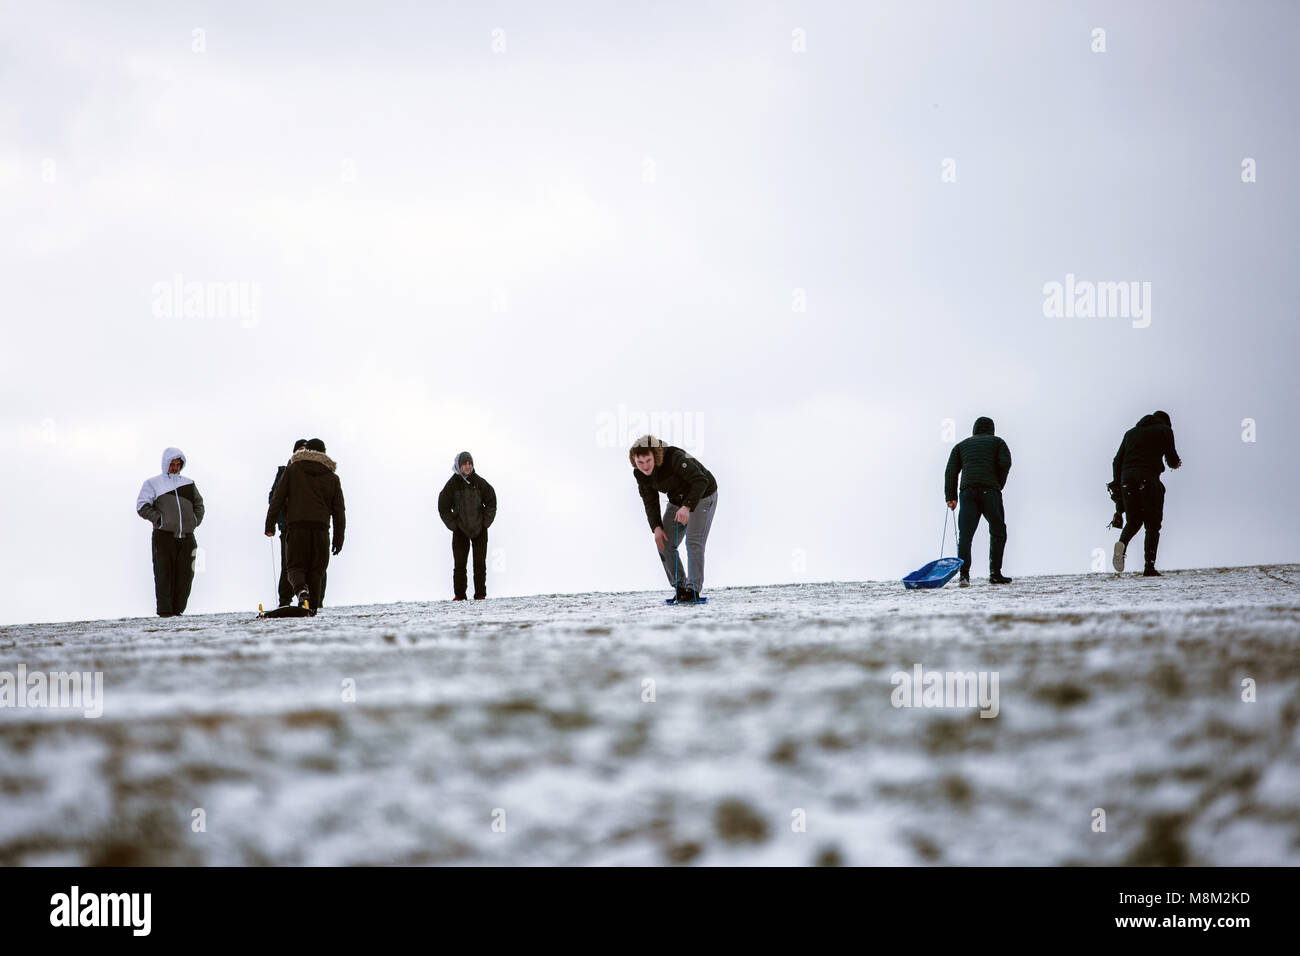 Leeds, Yorkshire, UK. 18th Mar, 2018. People seen using their sleds in the snow in Roundhay Park.Freezing weather conditions dubbed the 'Beast from the East' brings snow and sub-zero temperatures to the UK. Credit: Rahman Hassani/SOPA Images/ZUMA Wire/Alamy Live News Stock Photo